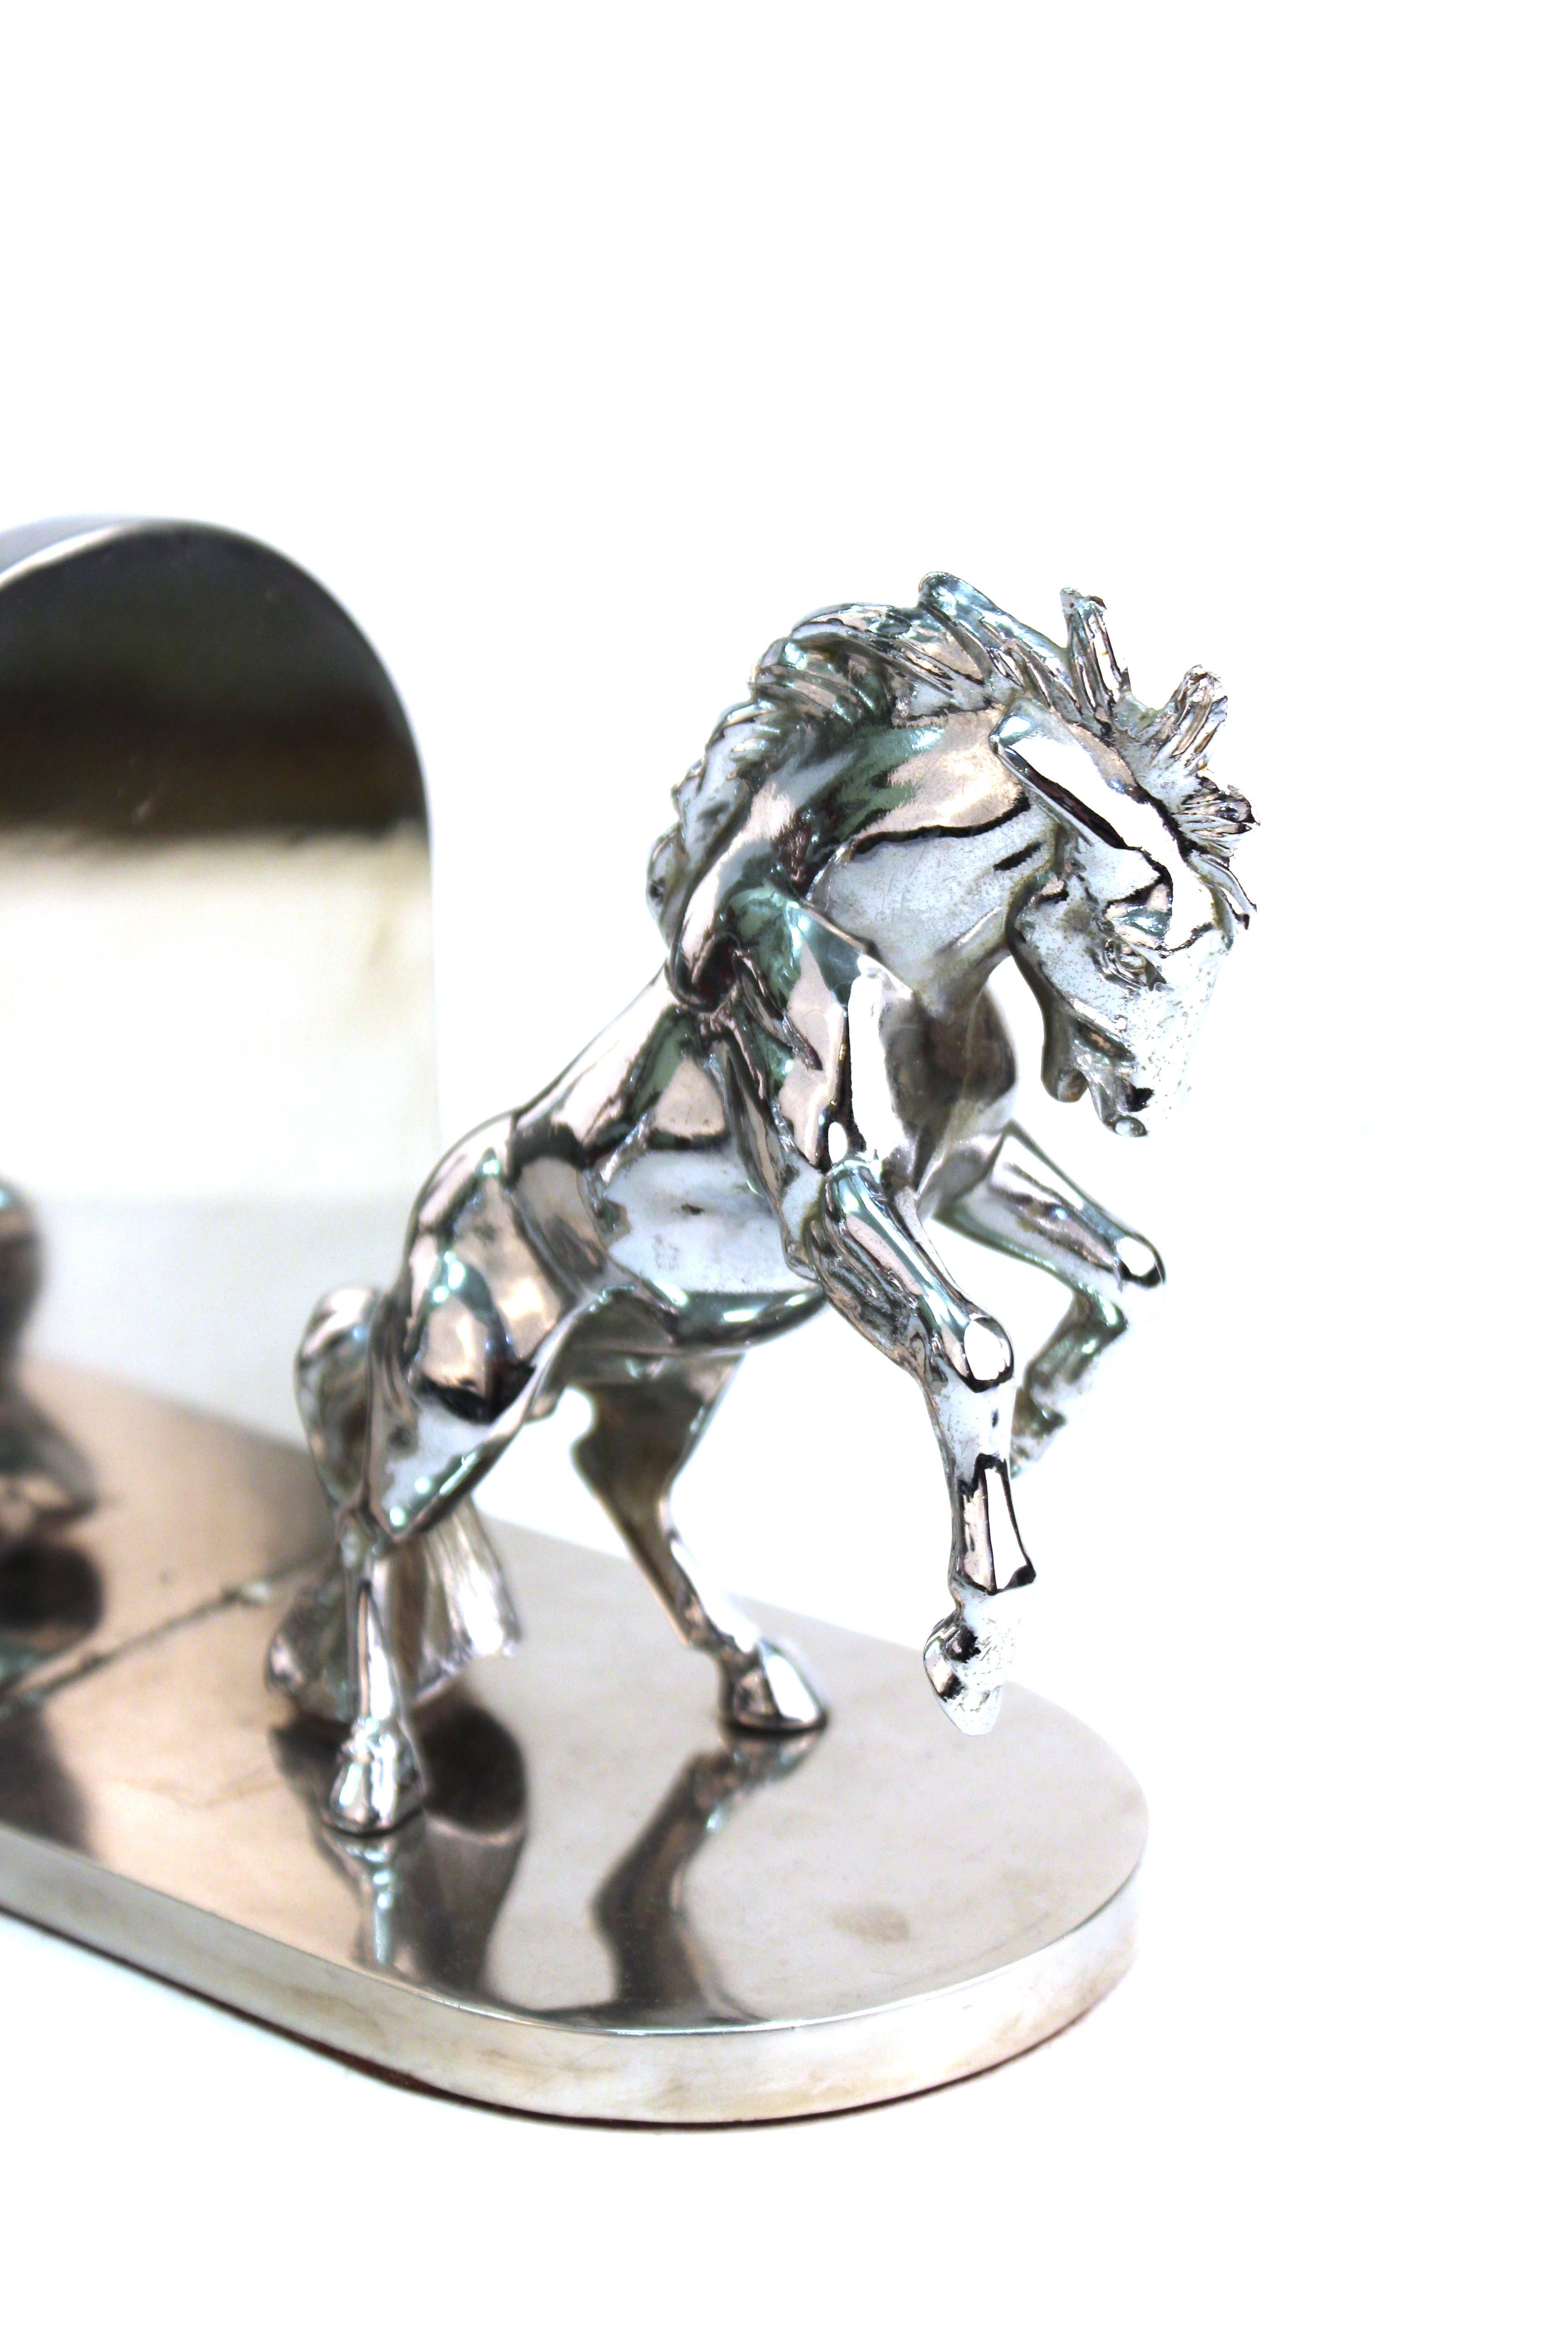 American Art Deco pair of bookends in shape of horses made in silvered bronze, stamped 'White'. The pair was likely made during the 1930s in the United States and is in great vintage condition with age-appropriate wear.